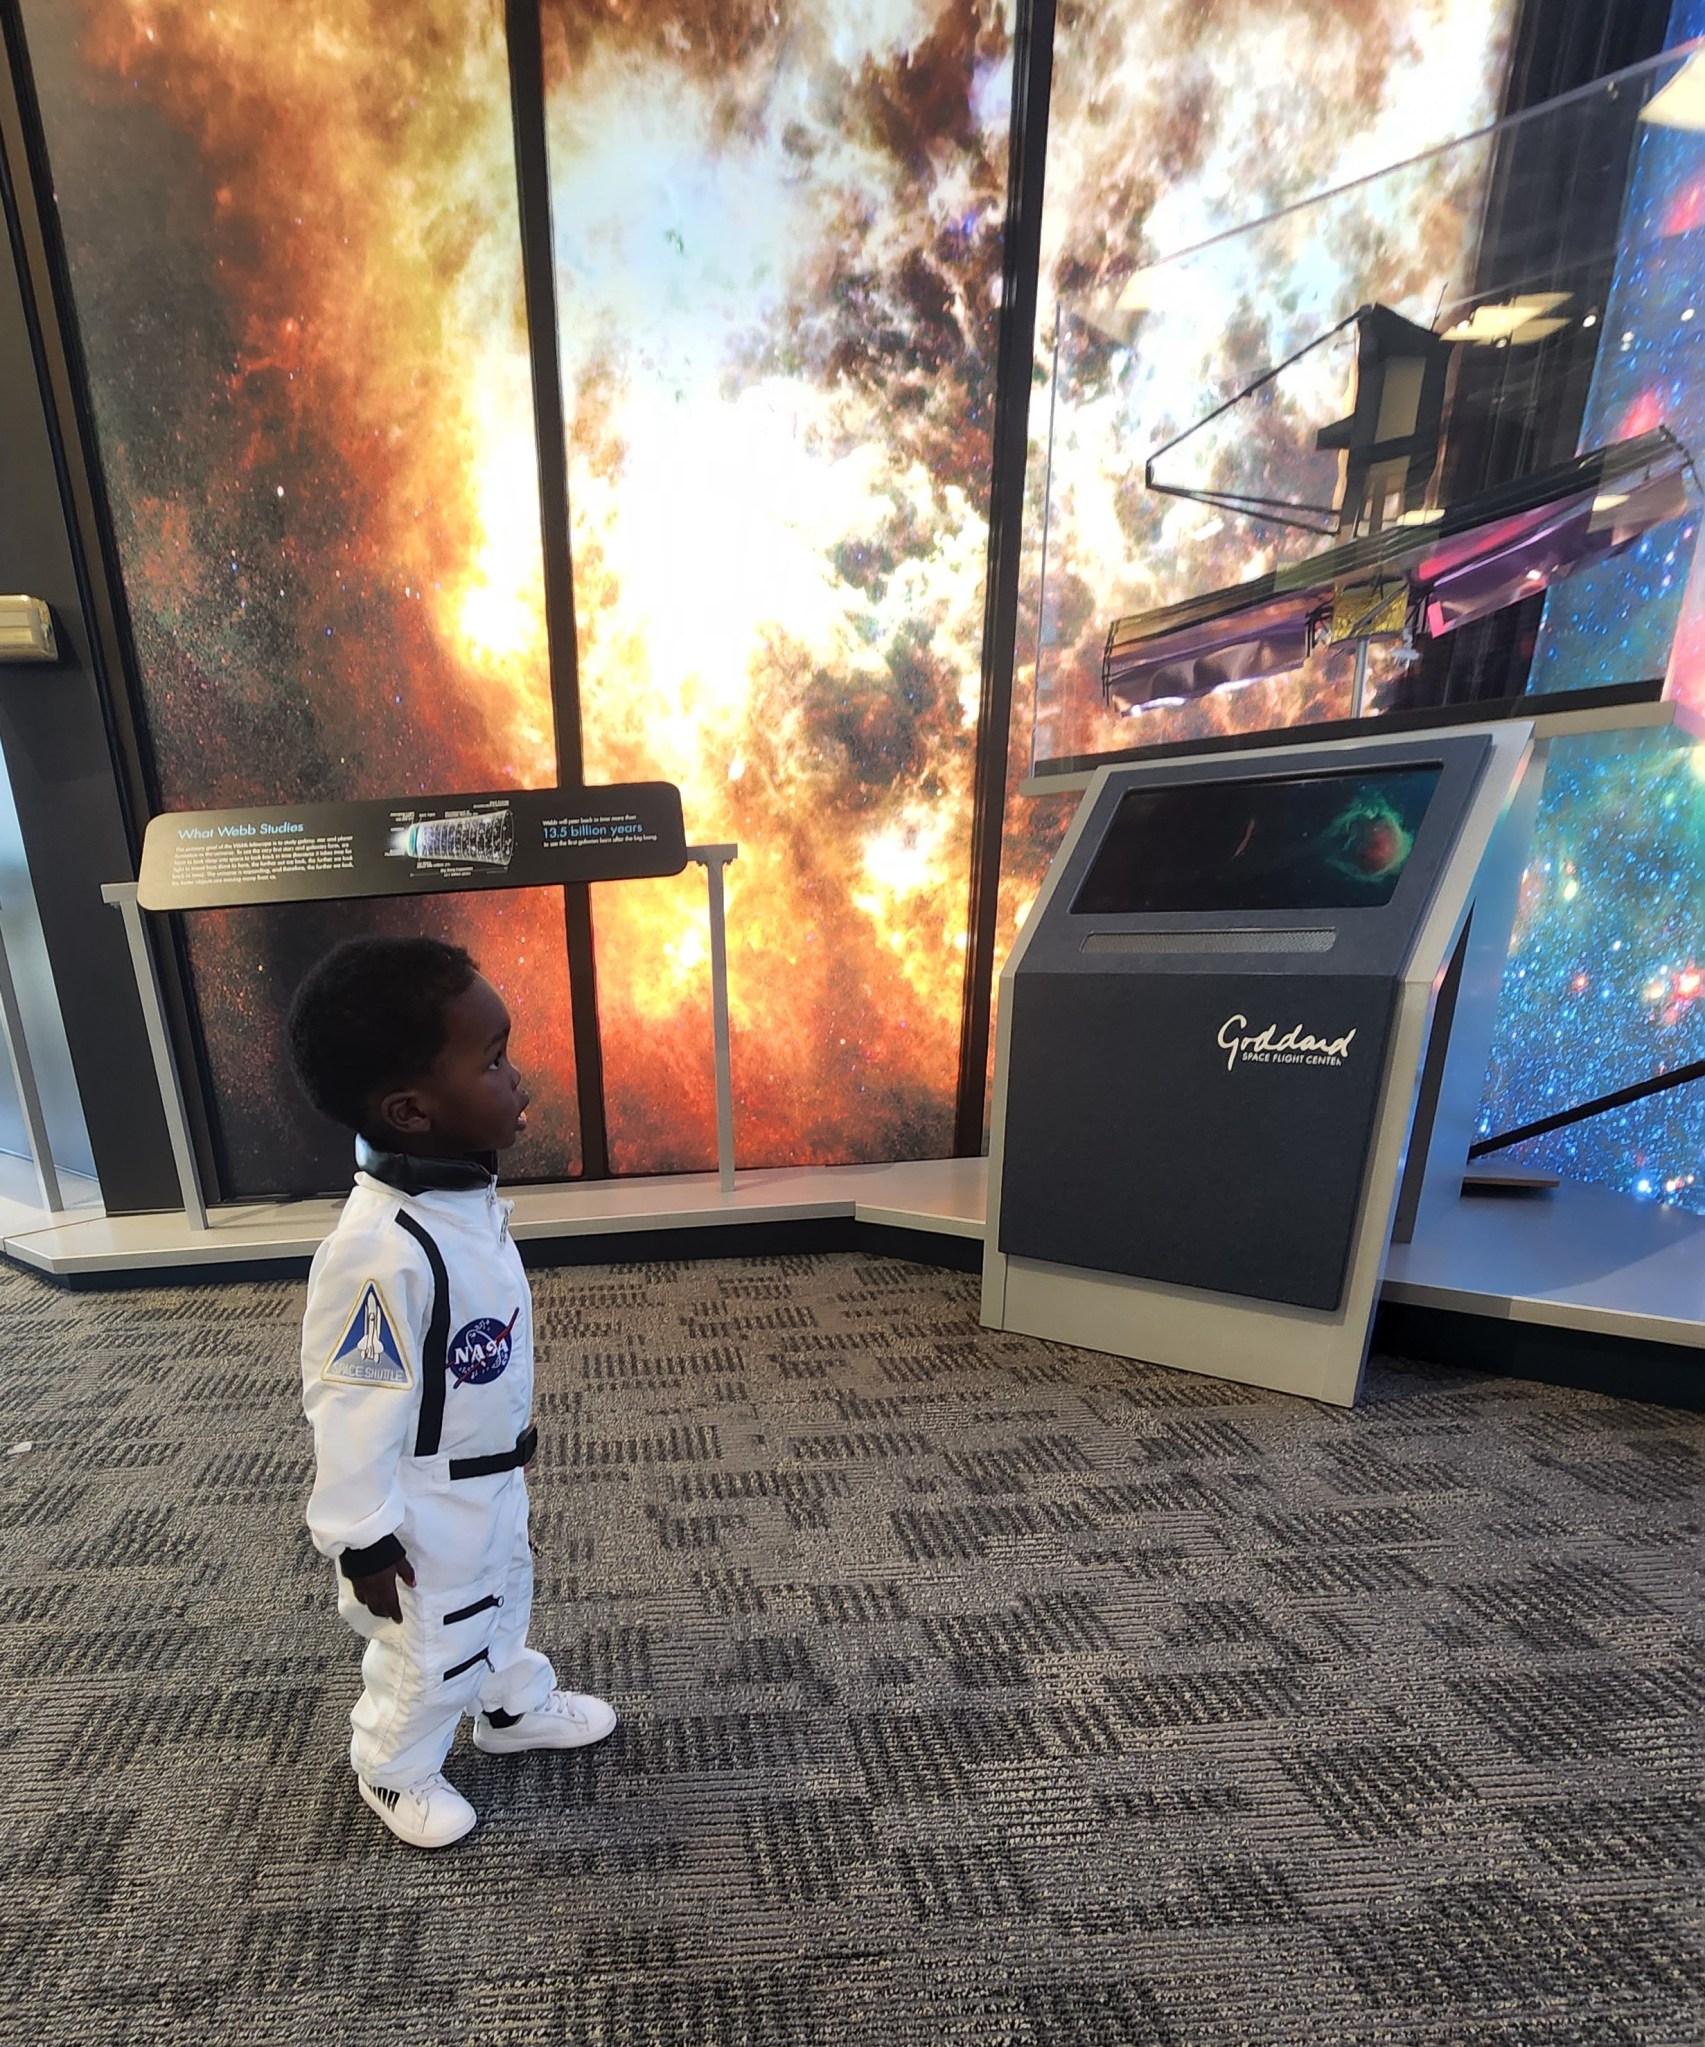 A small boy wearing an astronaut costume stands and looks up at a model of the James Webb Space Telescope. Colorful images of stars and nebulas line the walls behind him.